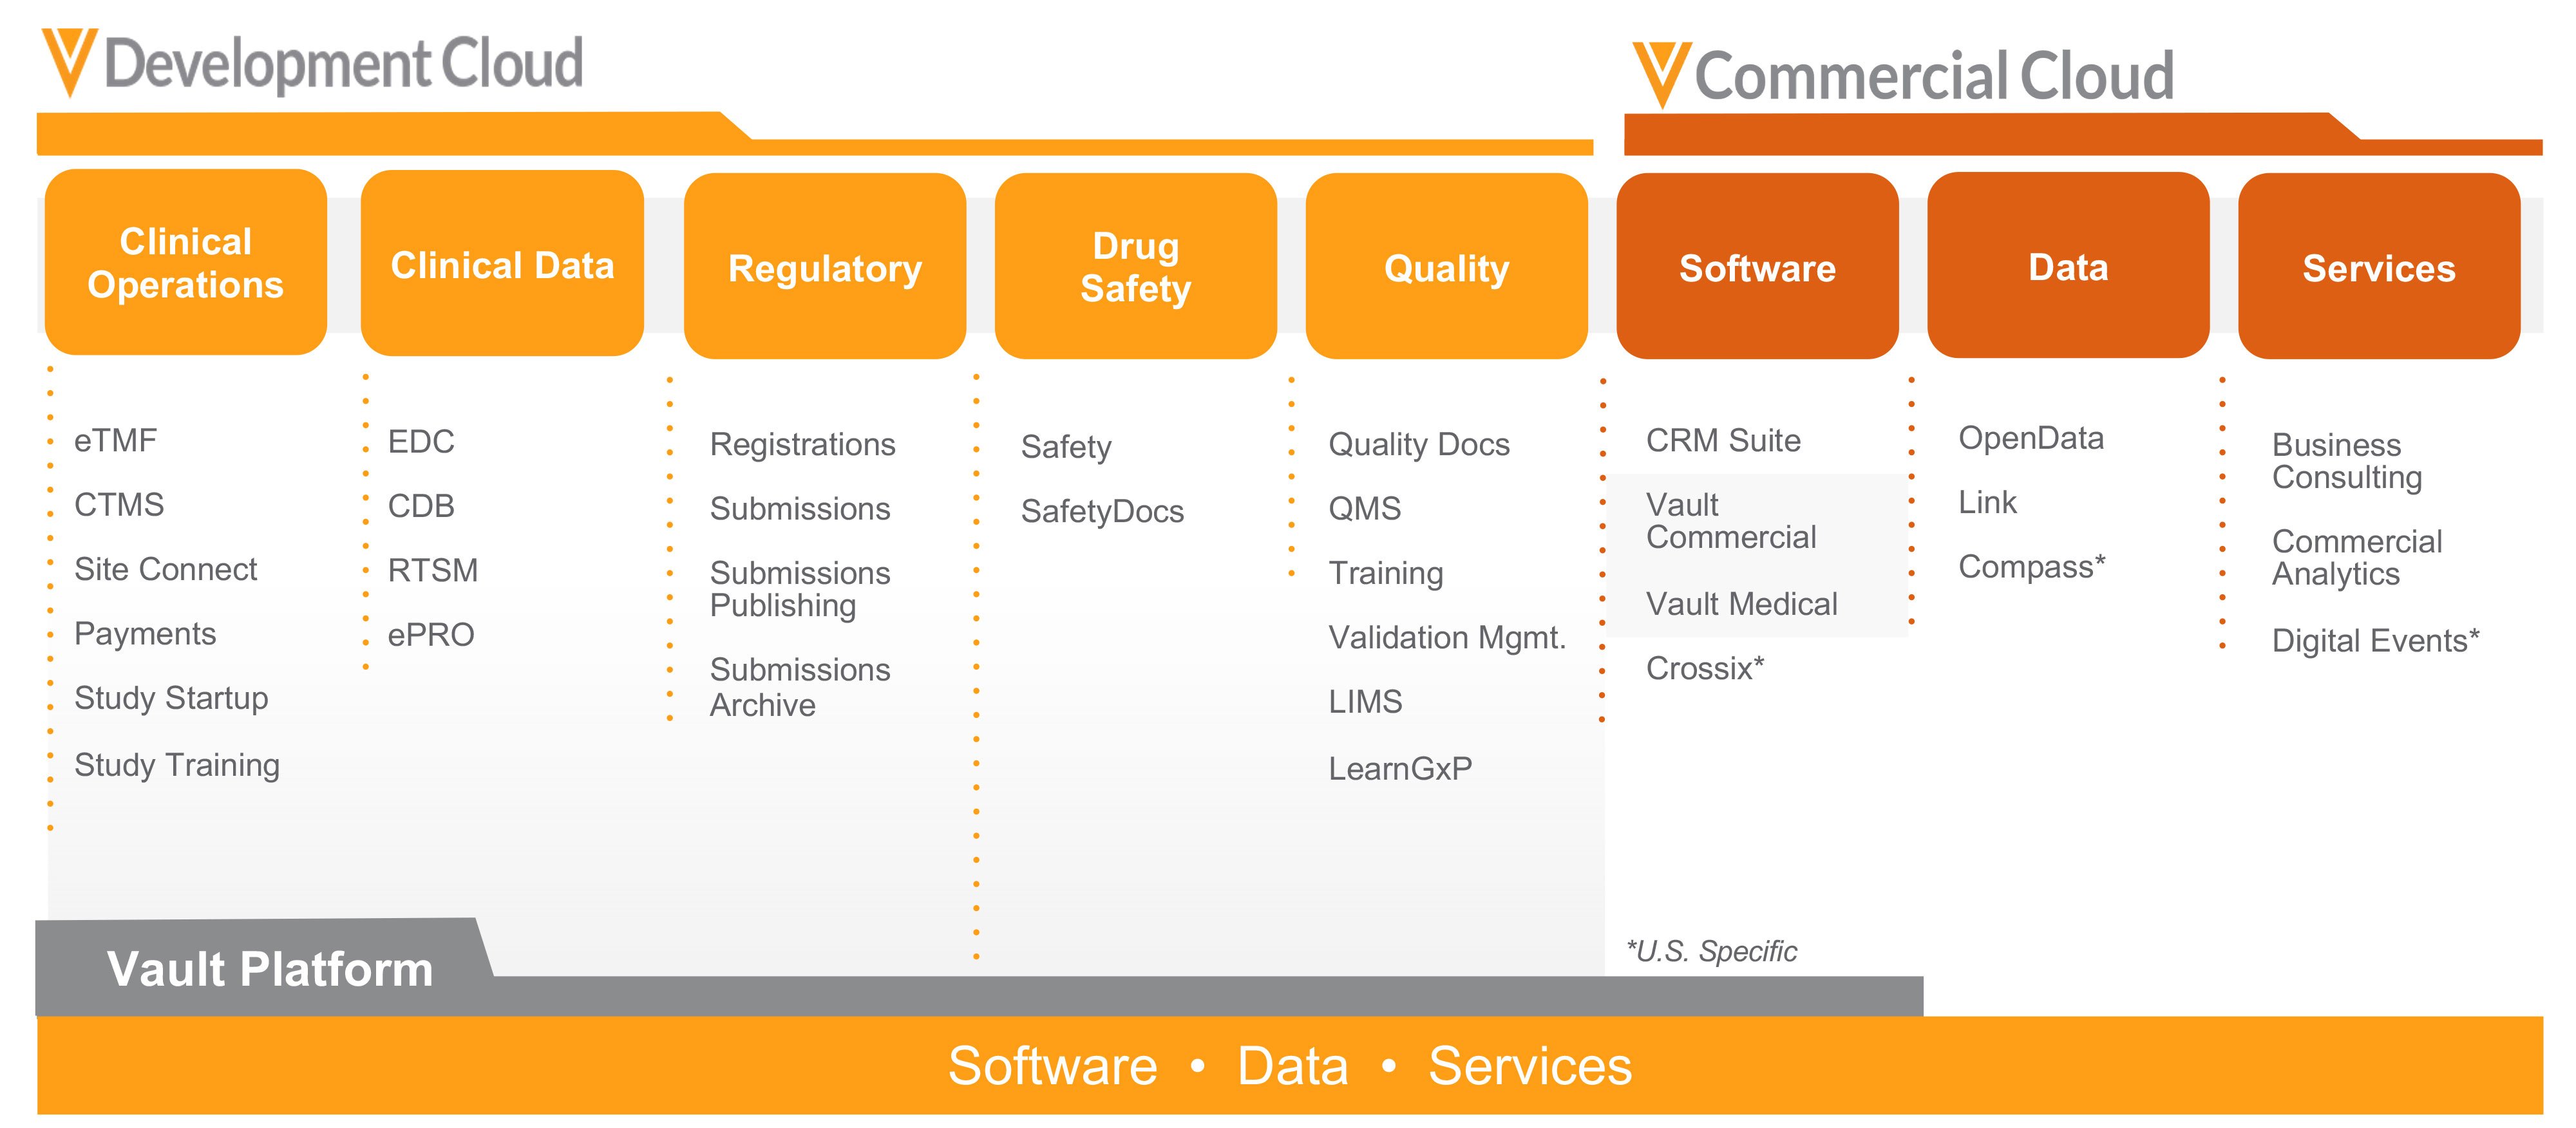 veeva systems development and commercial crm chart